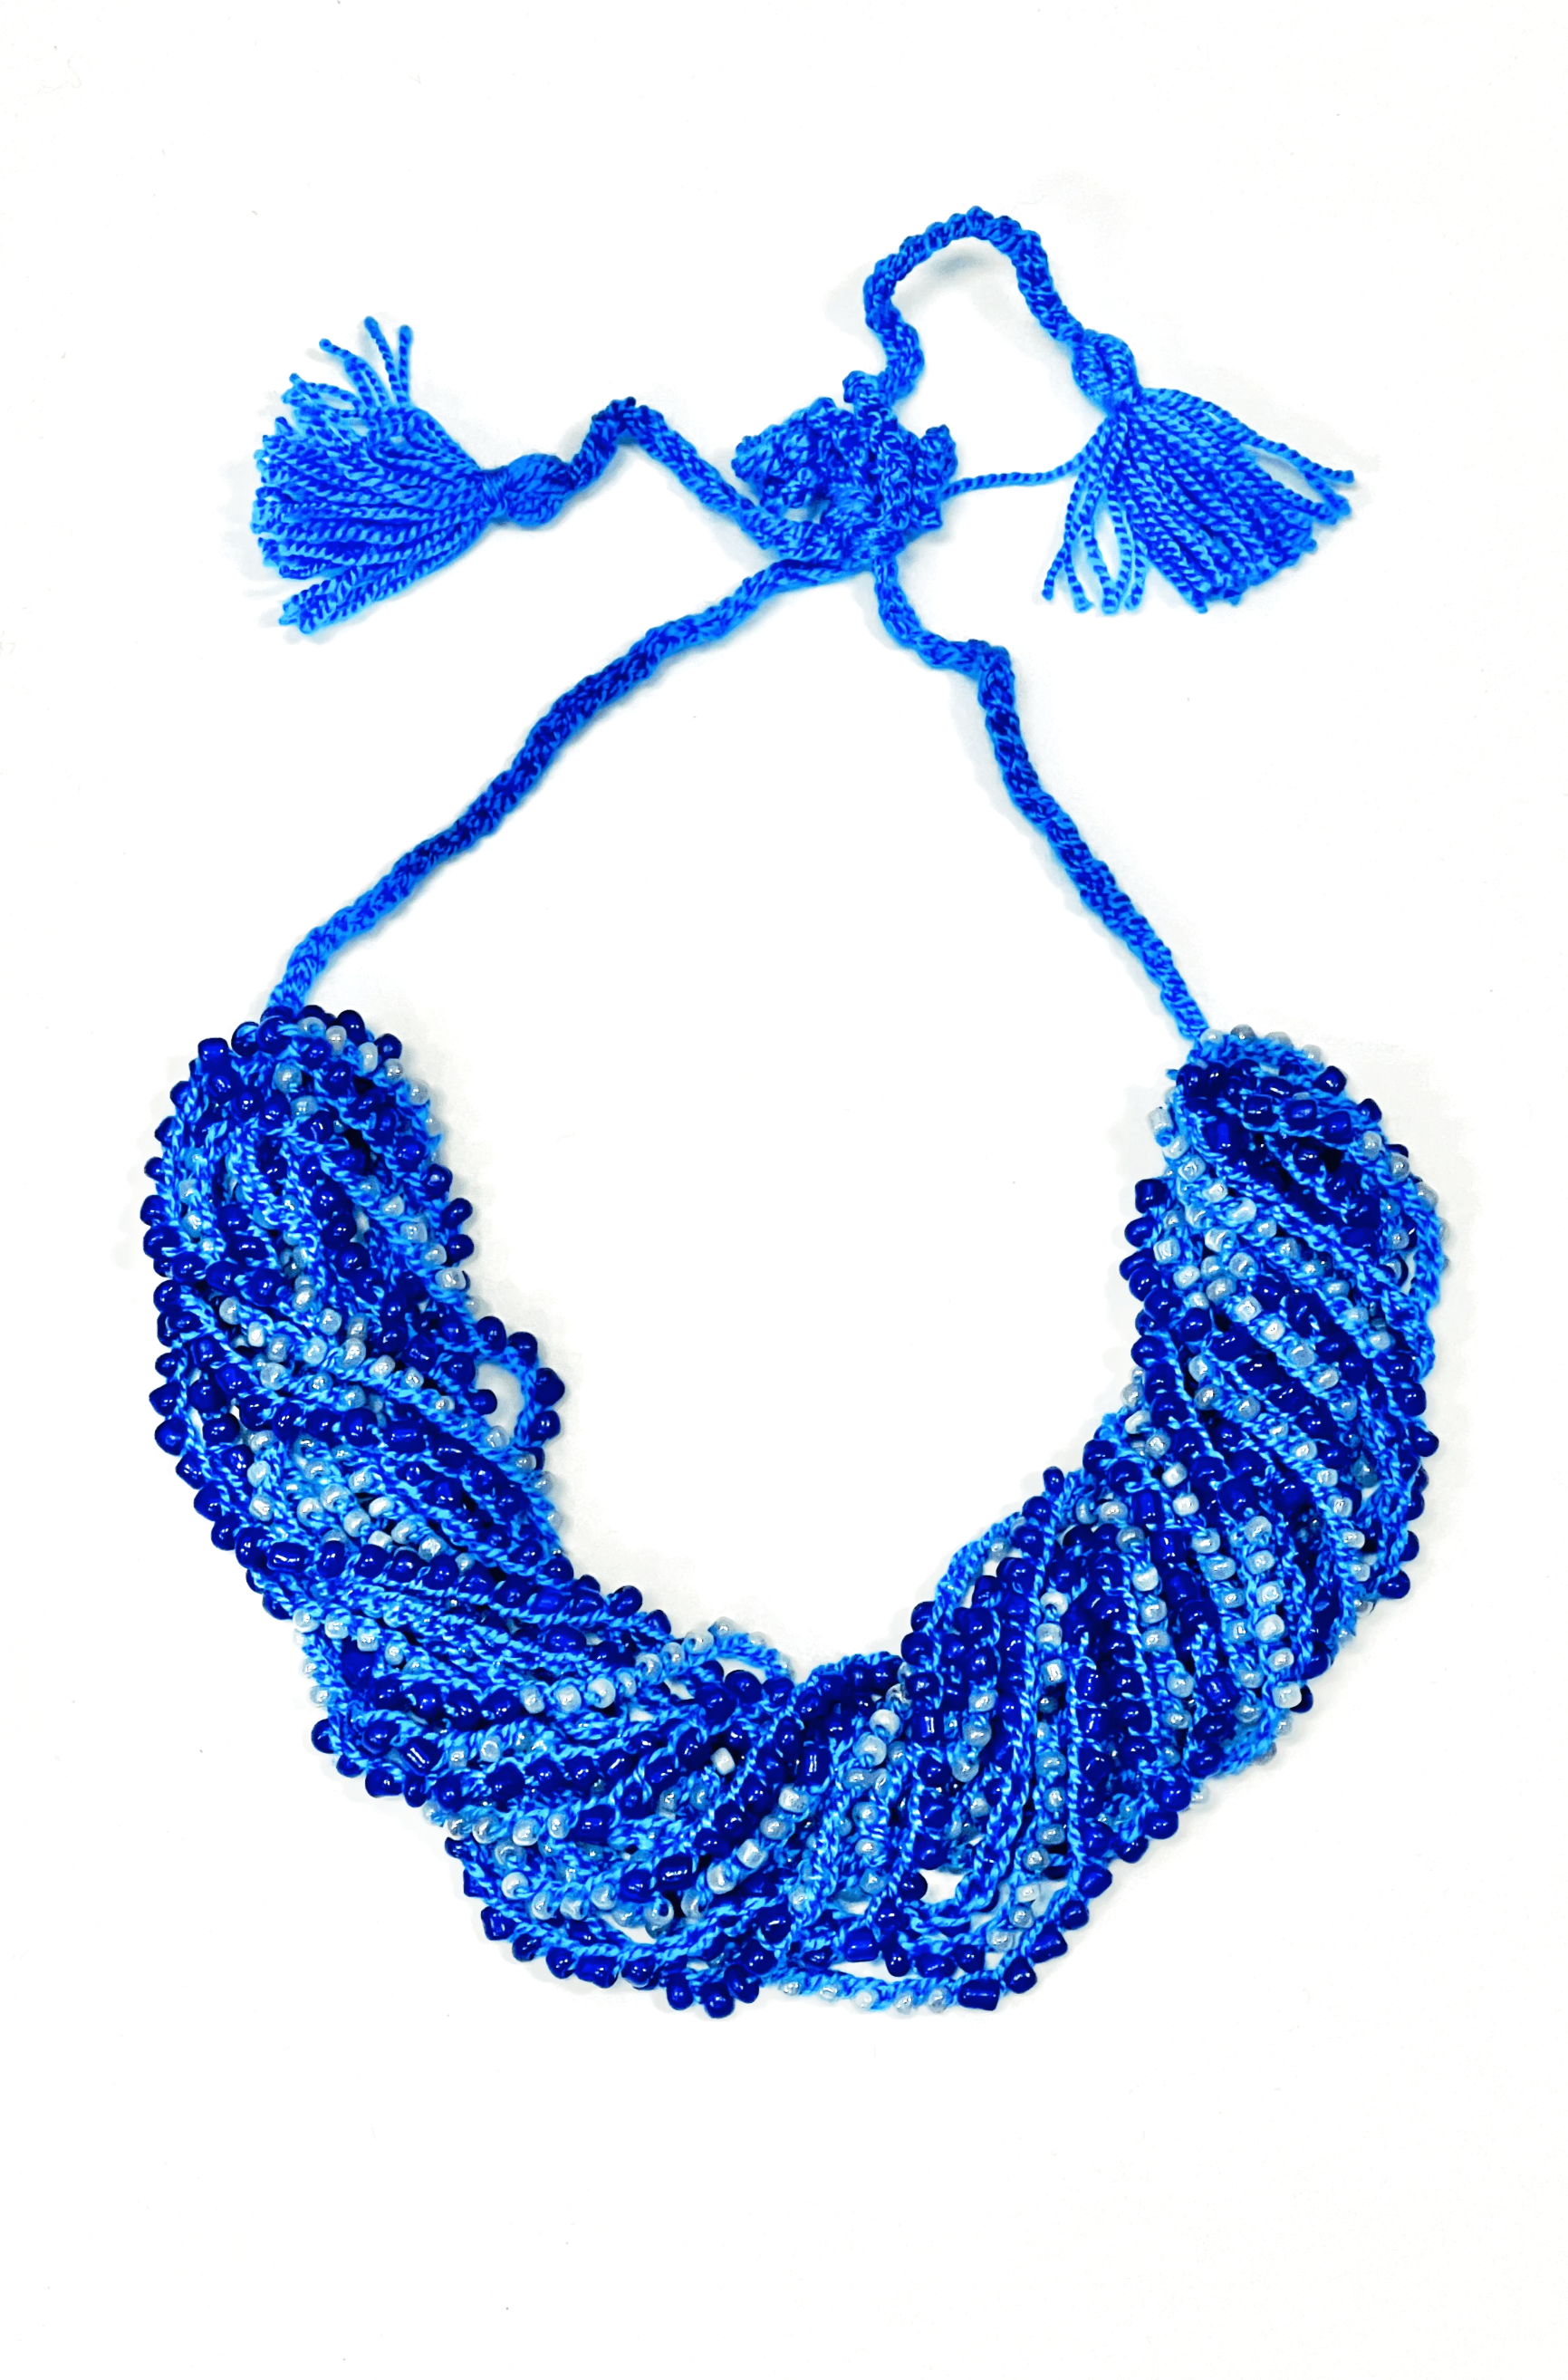 Artisan crafted woven bead necklace. Blue